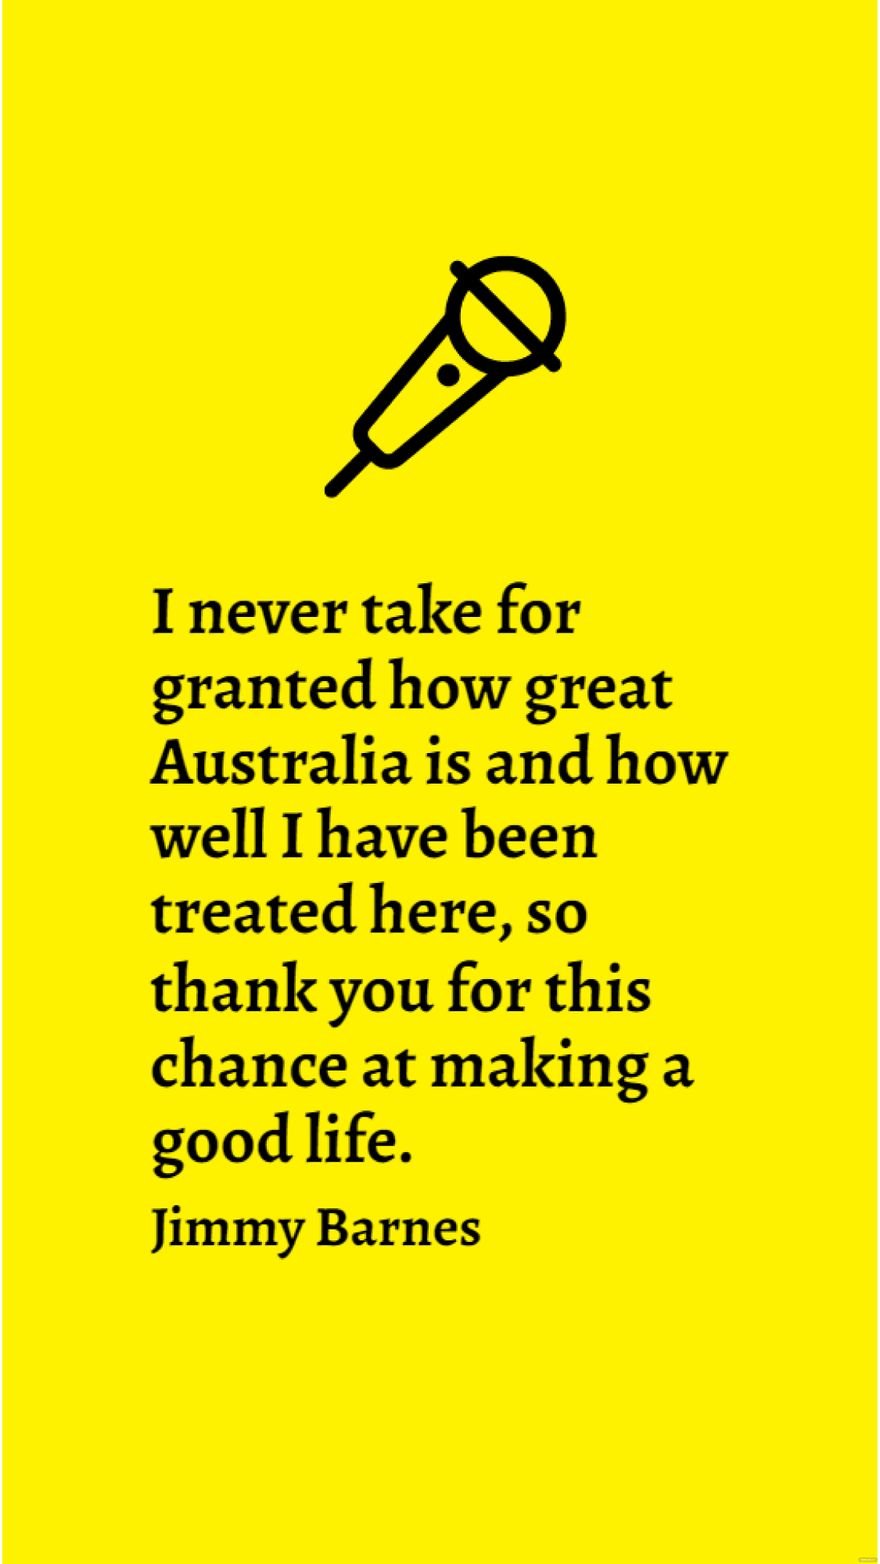 Free Jimmy Barnes - I never take for granted how great Australia is and how well I have been treated here, so thank you for this chance at making a good life. in JPG